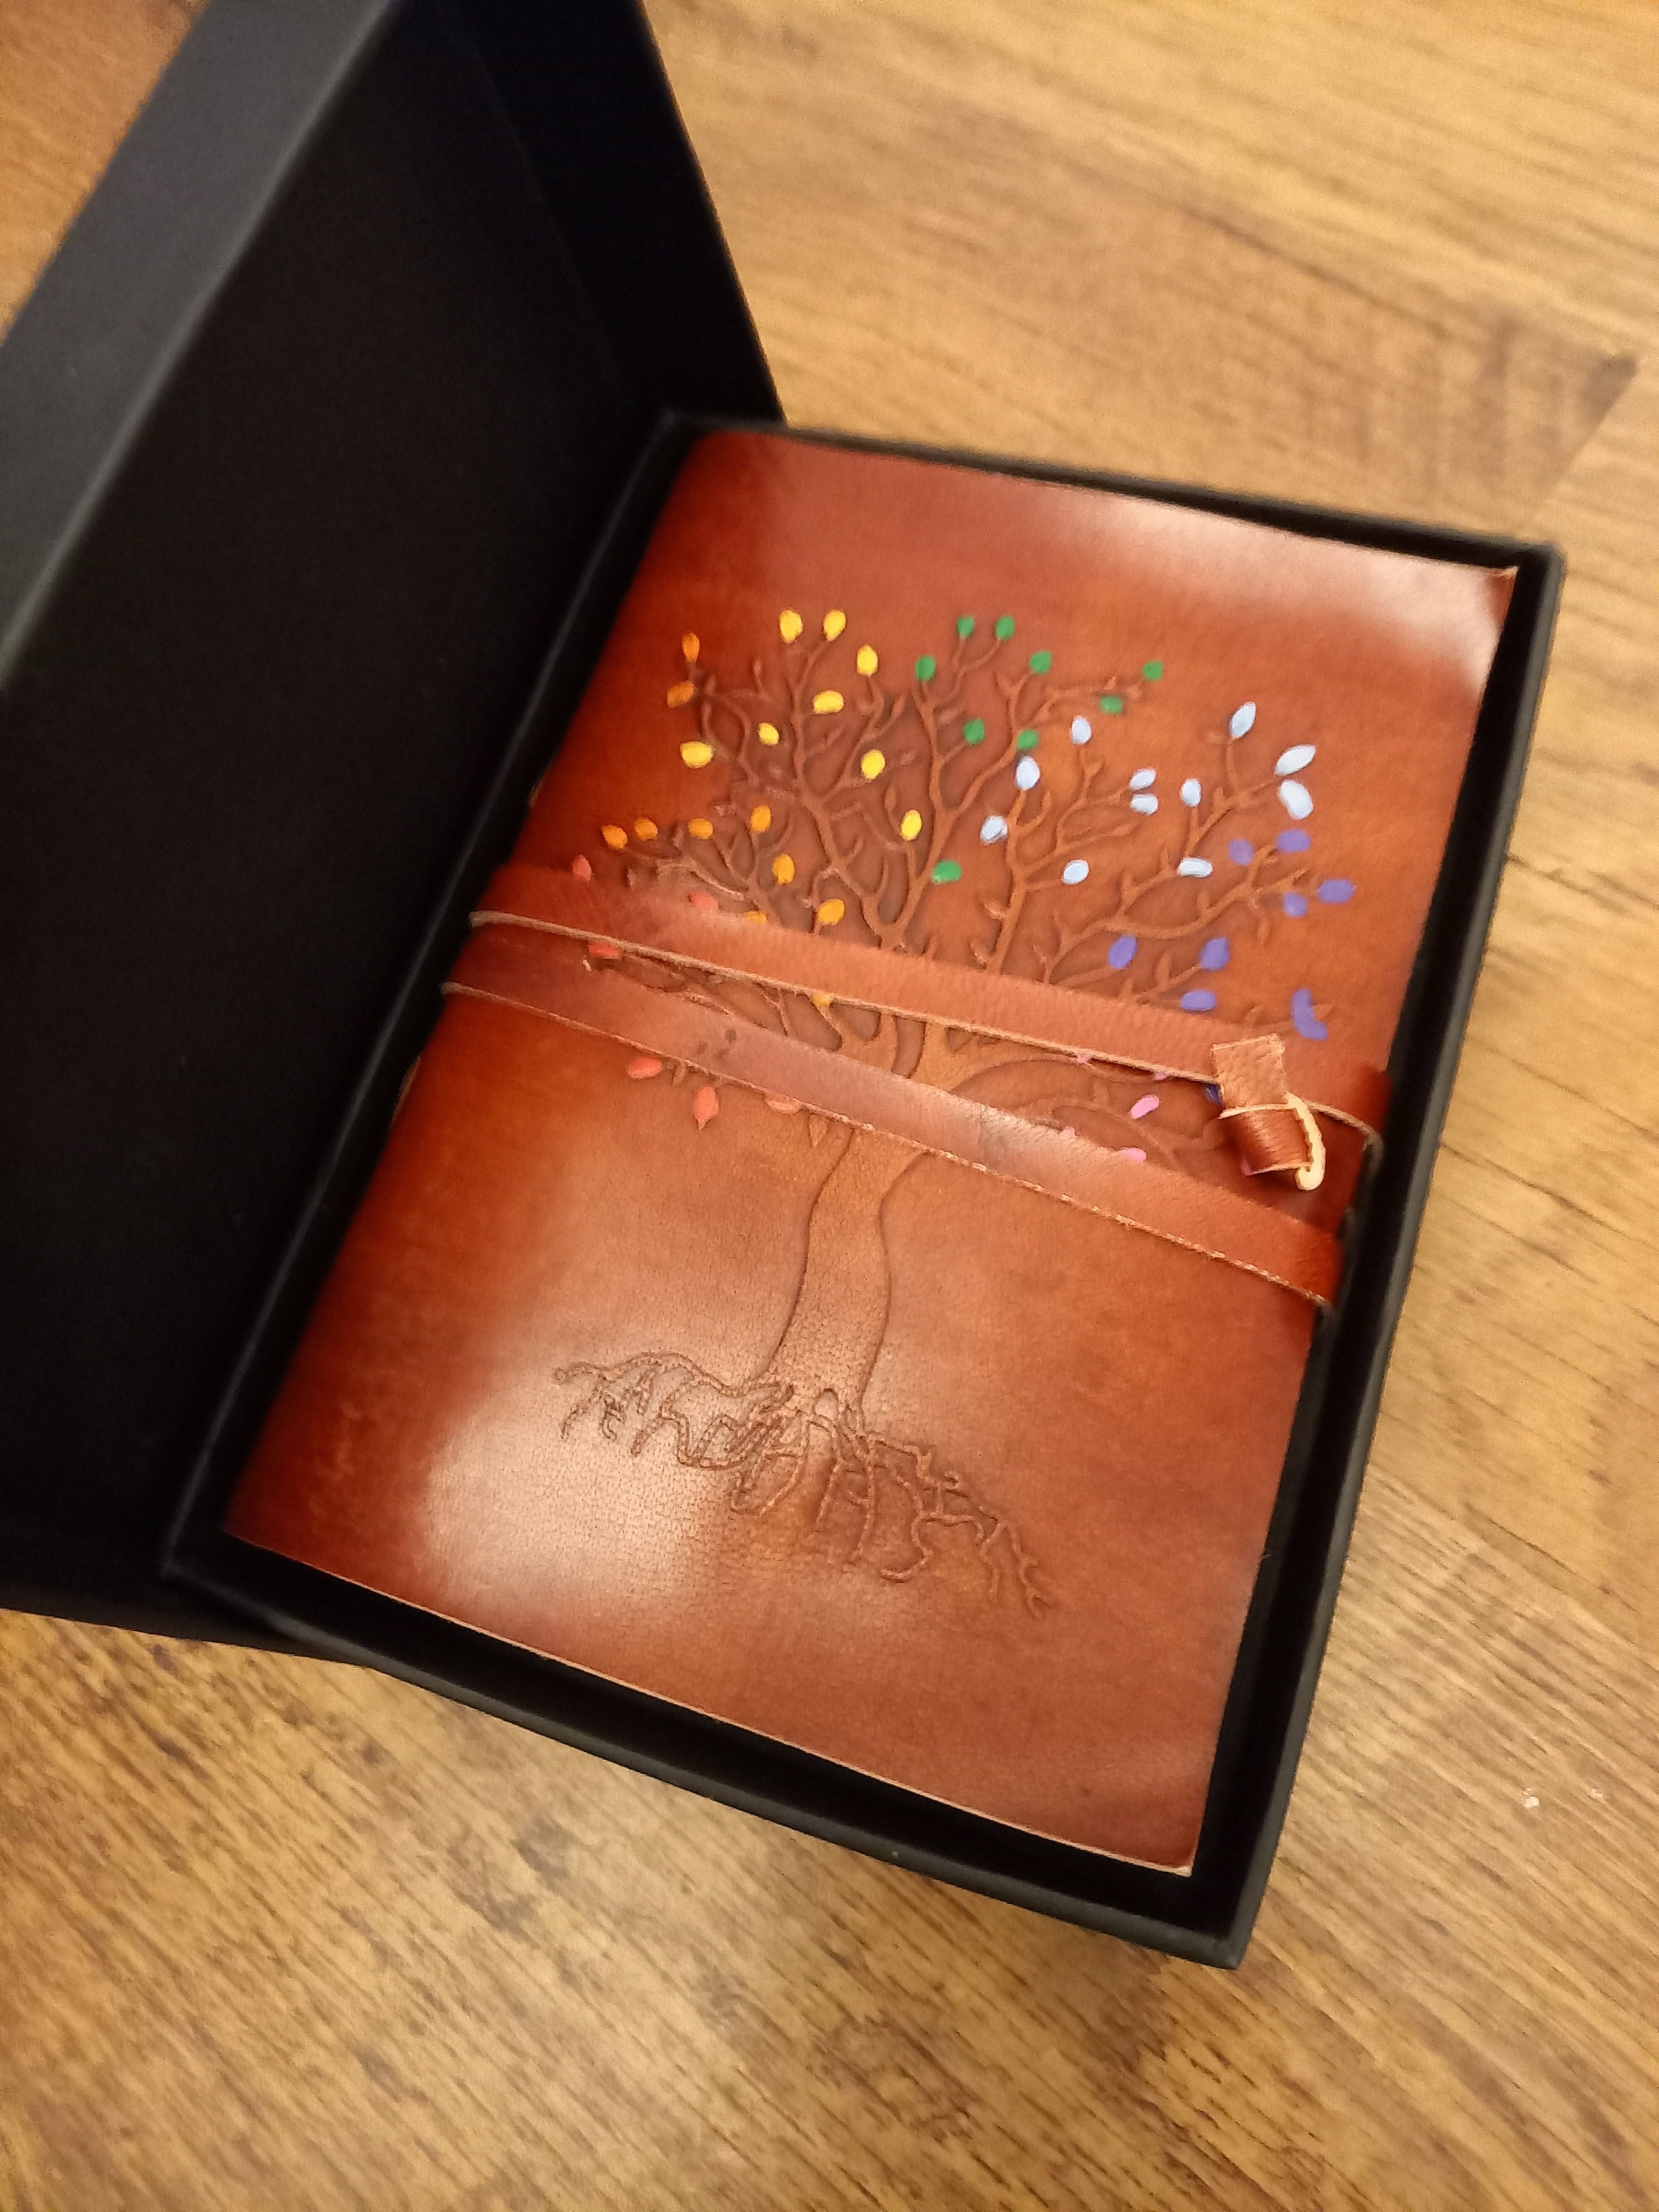  moonster Leather Journal Tree of Life - Genuine Leather  Notebooks For Women - Beautiful Journal with Embossed Tree - Blank Handmade  Paper - Inspirational Birthday Gifts for Women & Gifts